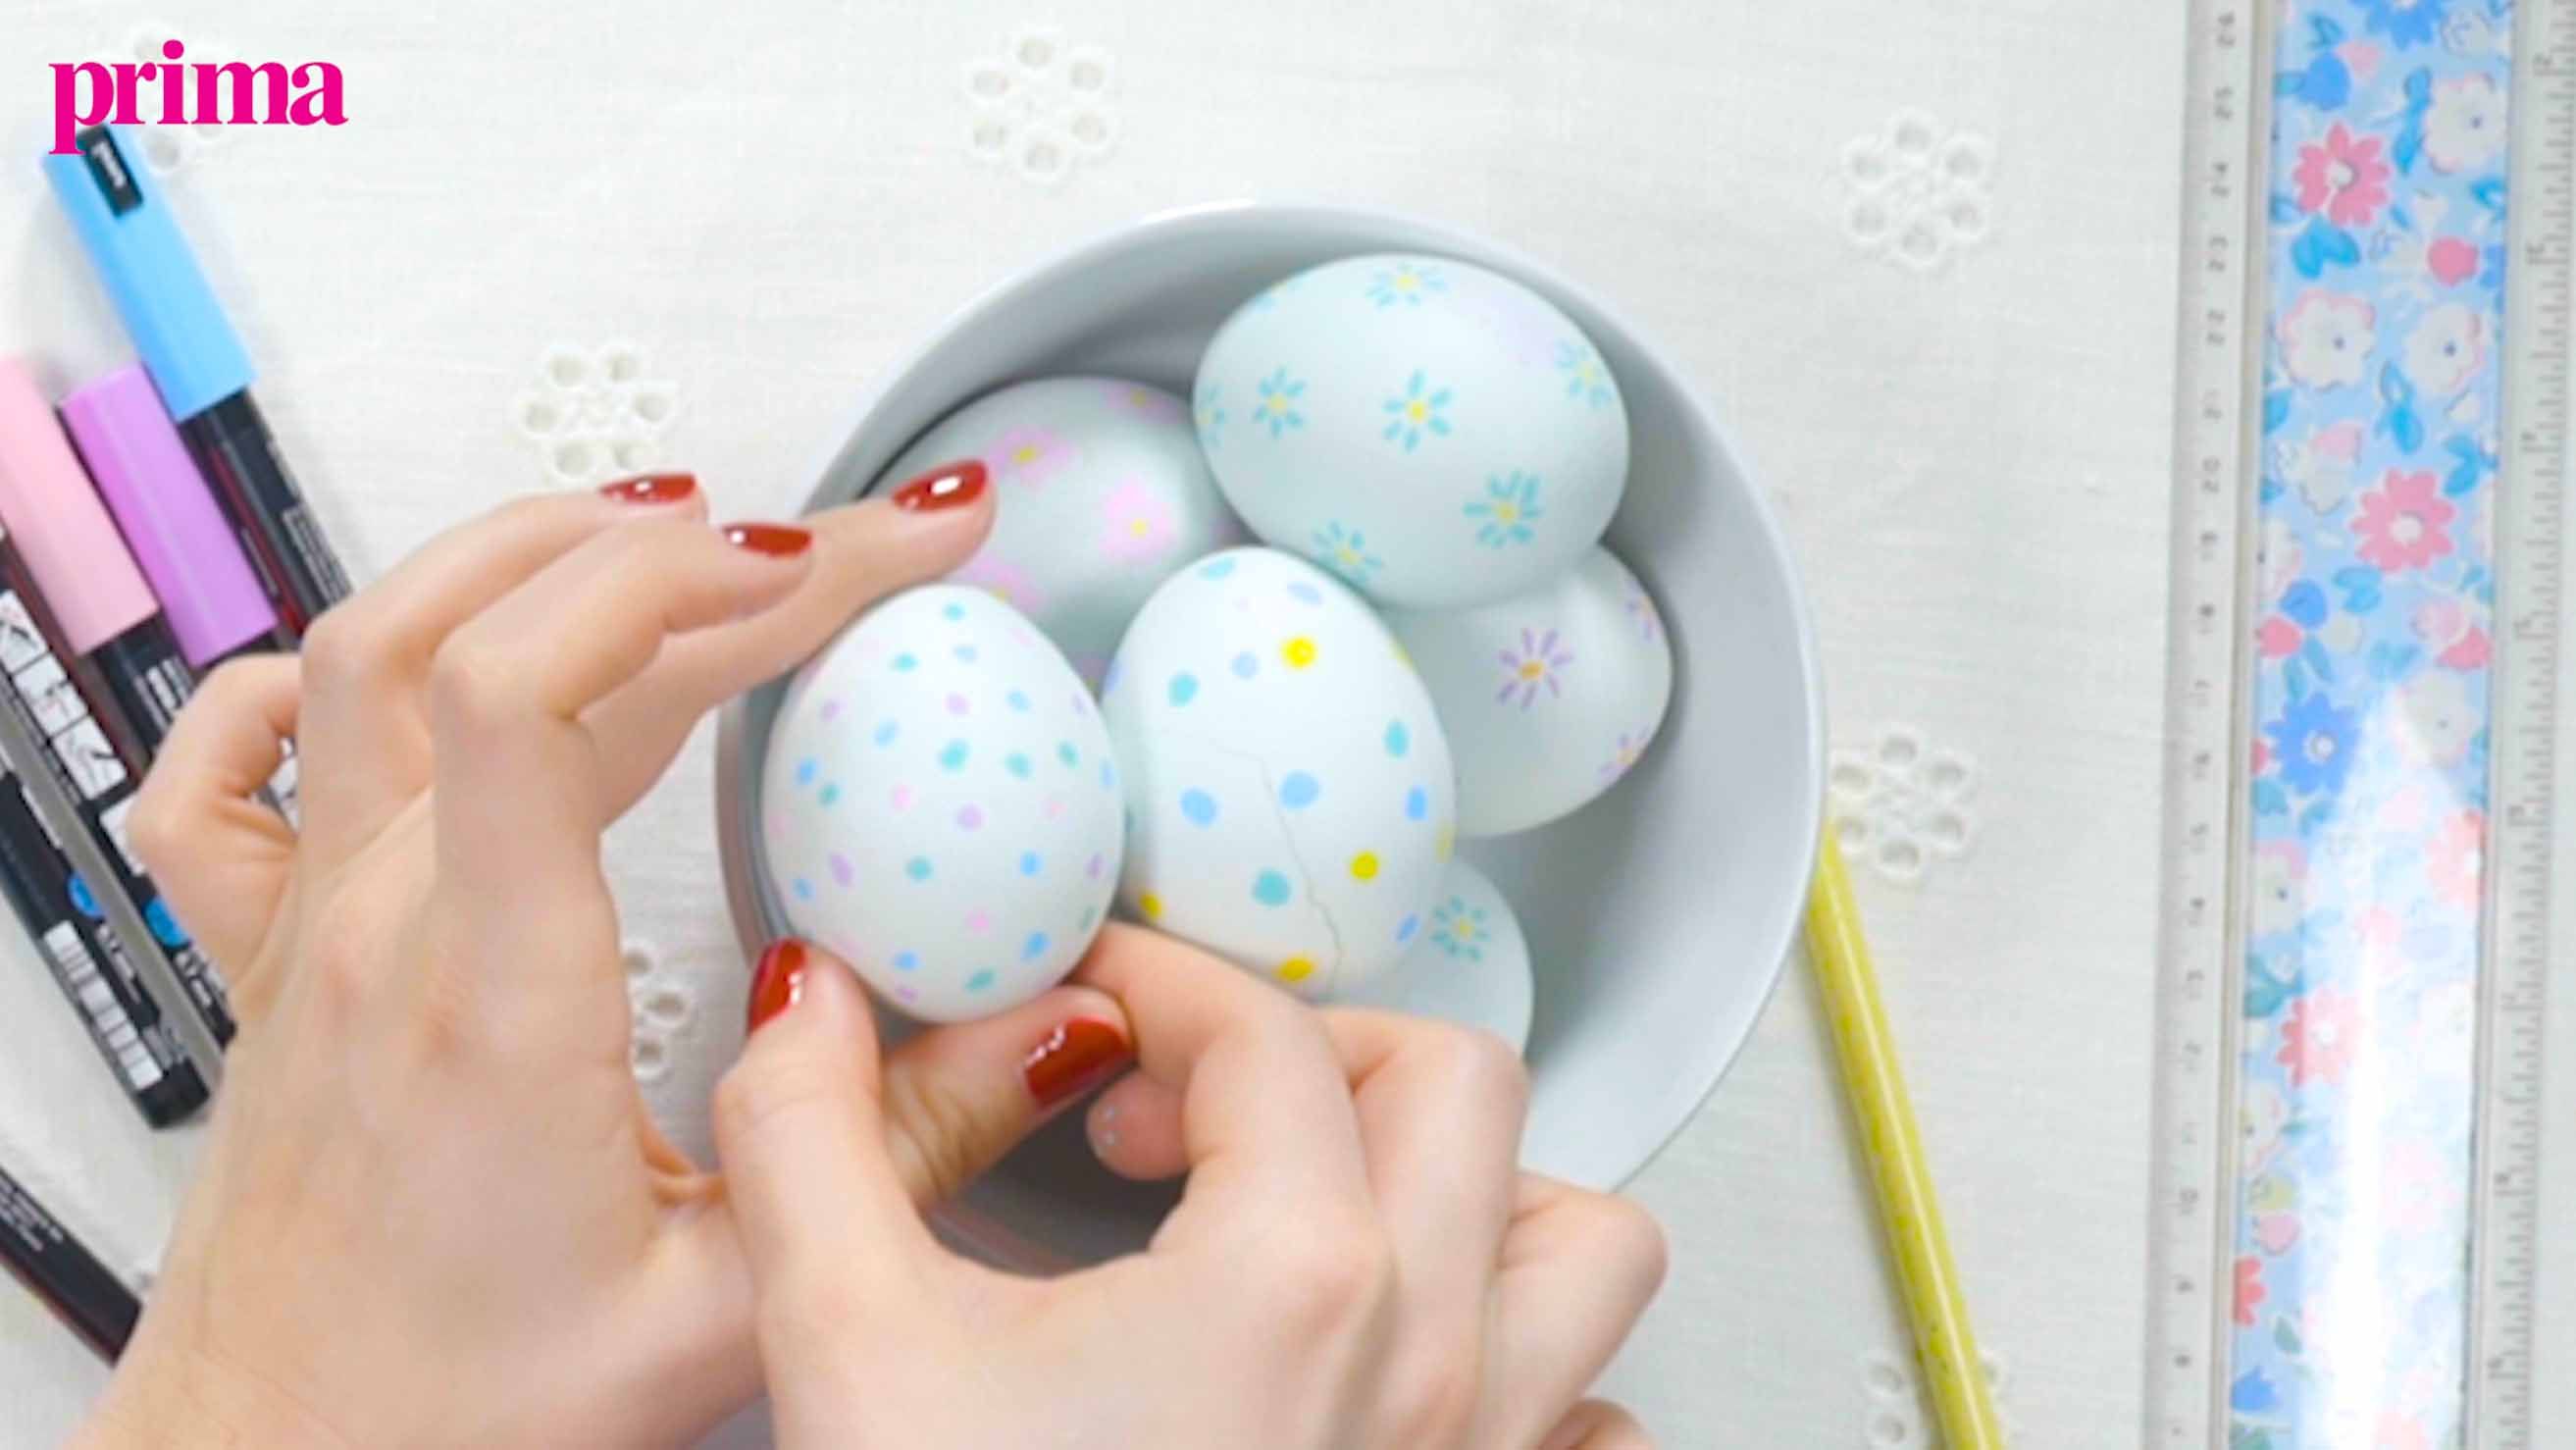 Egg decorating ideas: How to decorate eggs for Easter